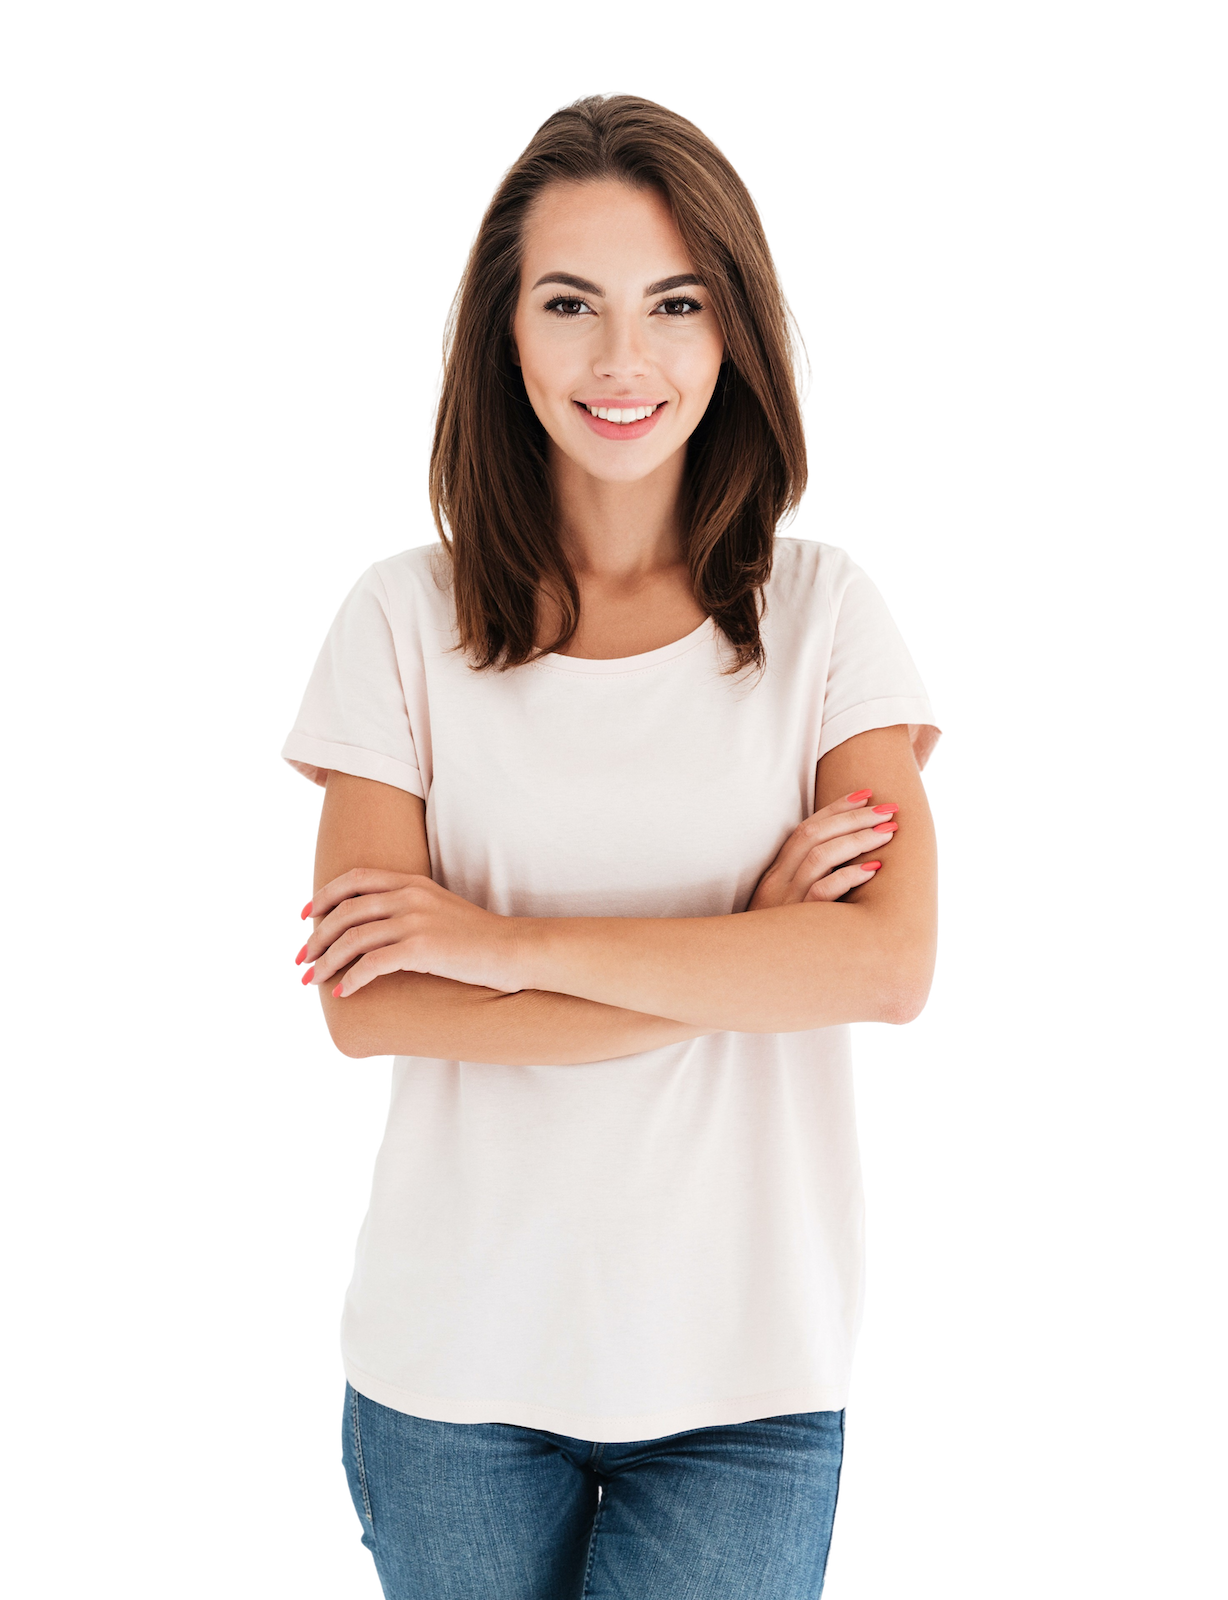 Young woman, in a white shirt, smiling, with her arms crossed